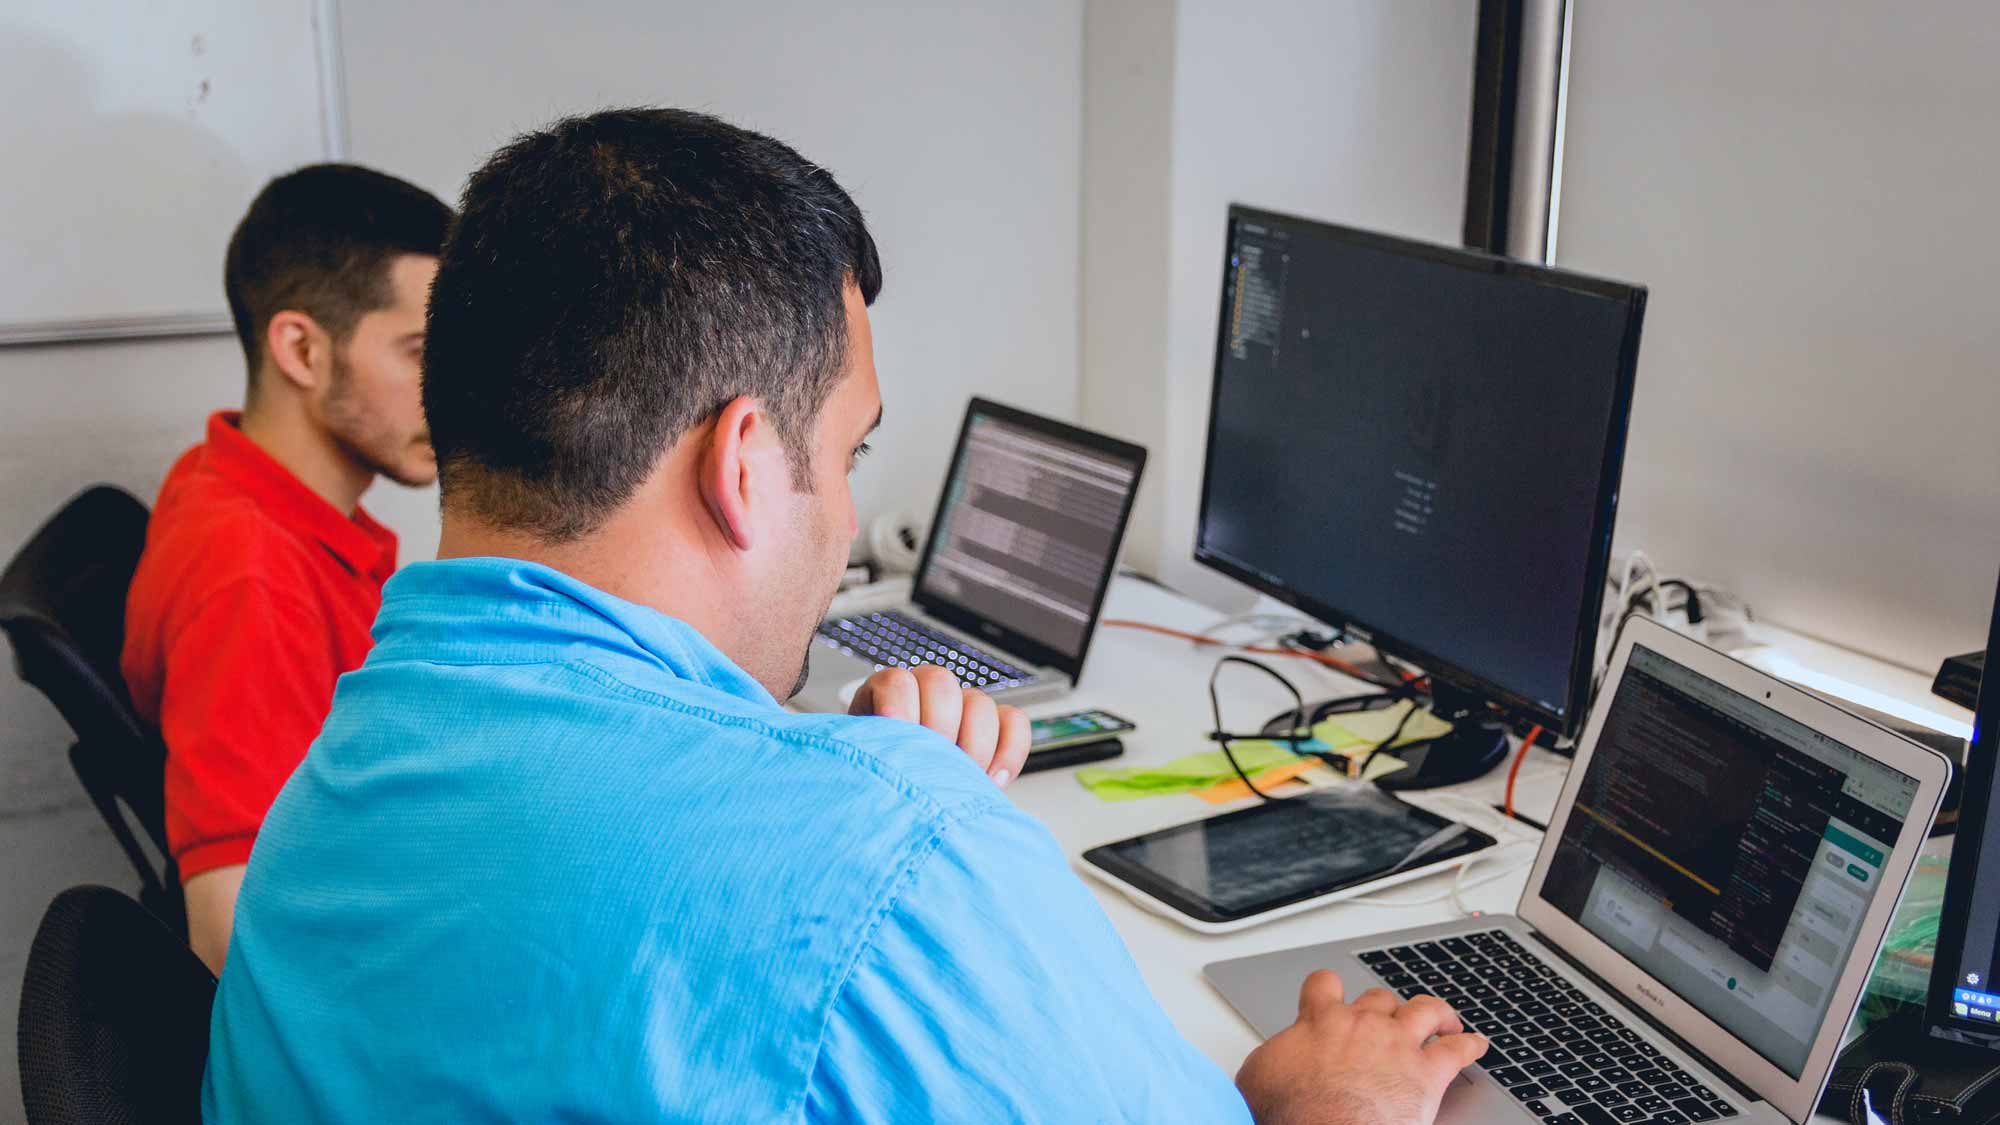 Man showing something on computer to another one